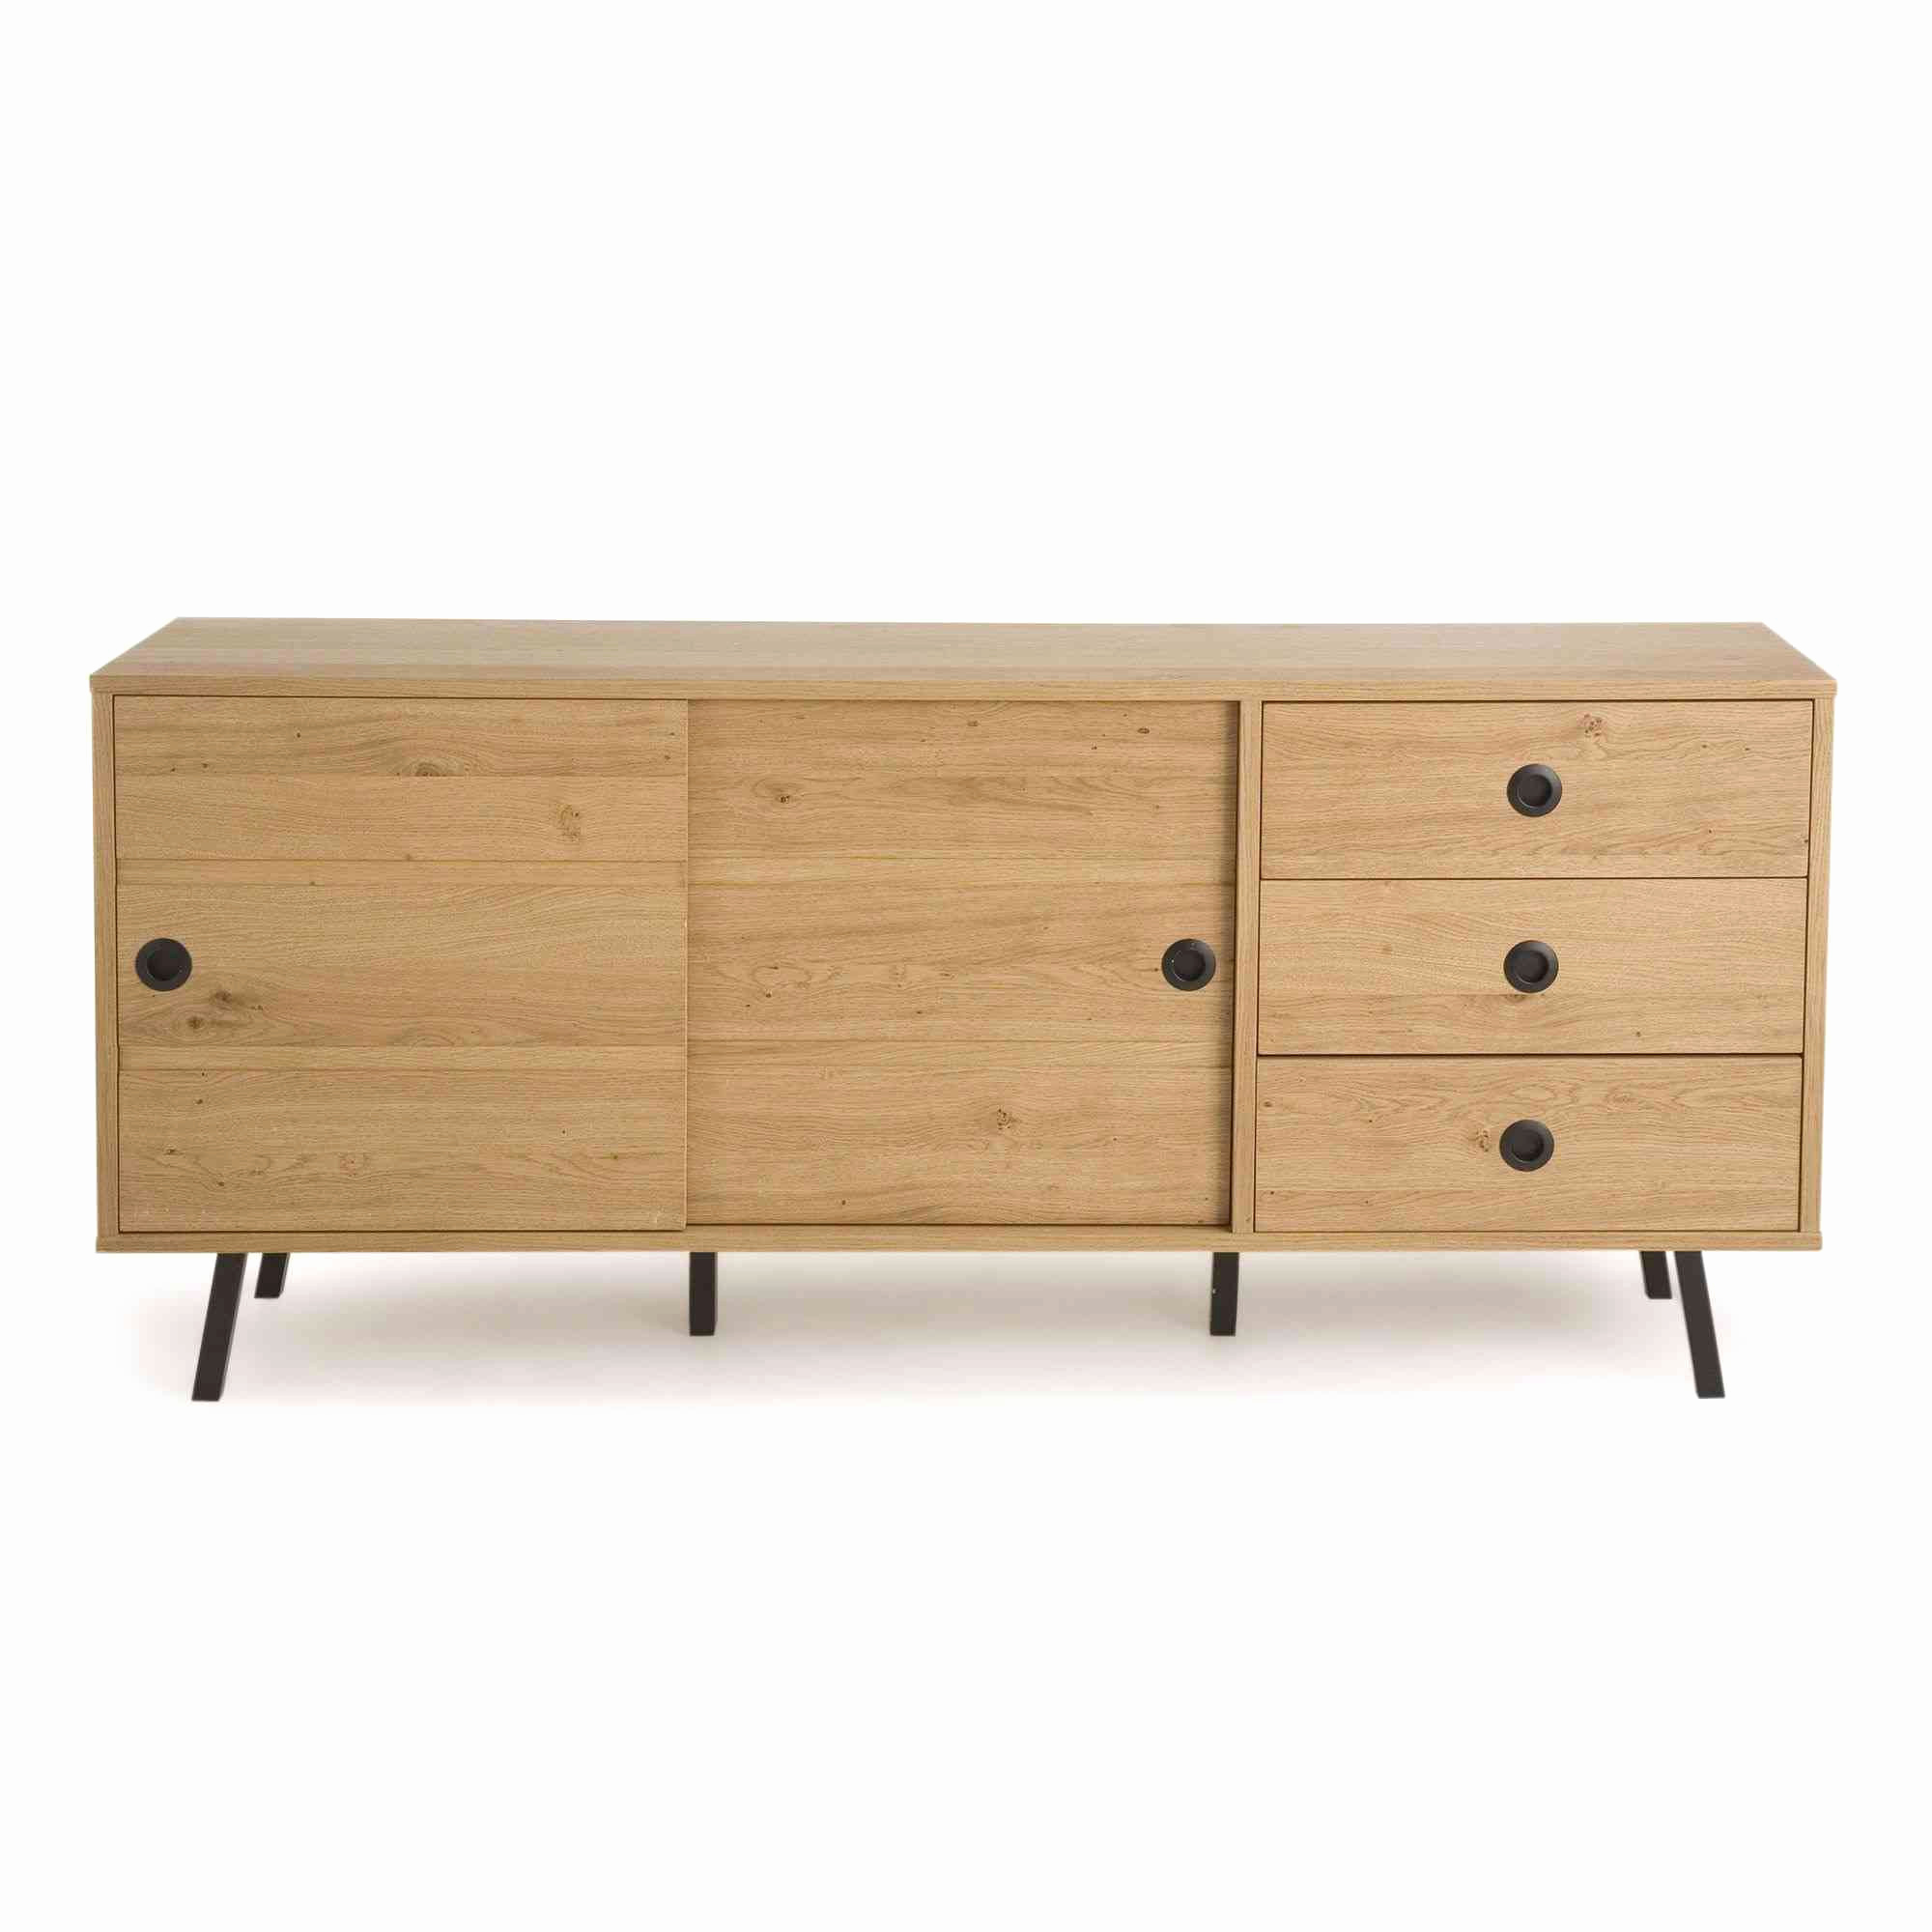 Achat meuble cocktail scandinave